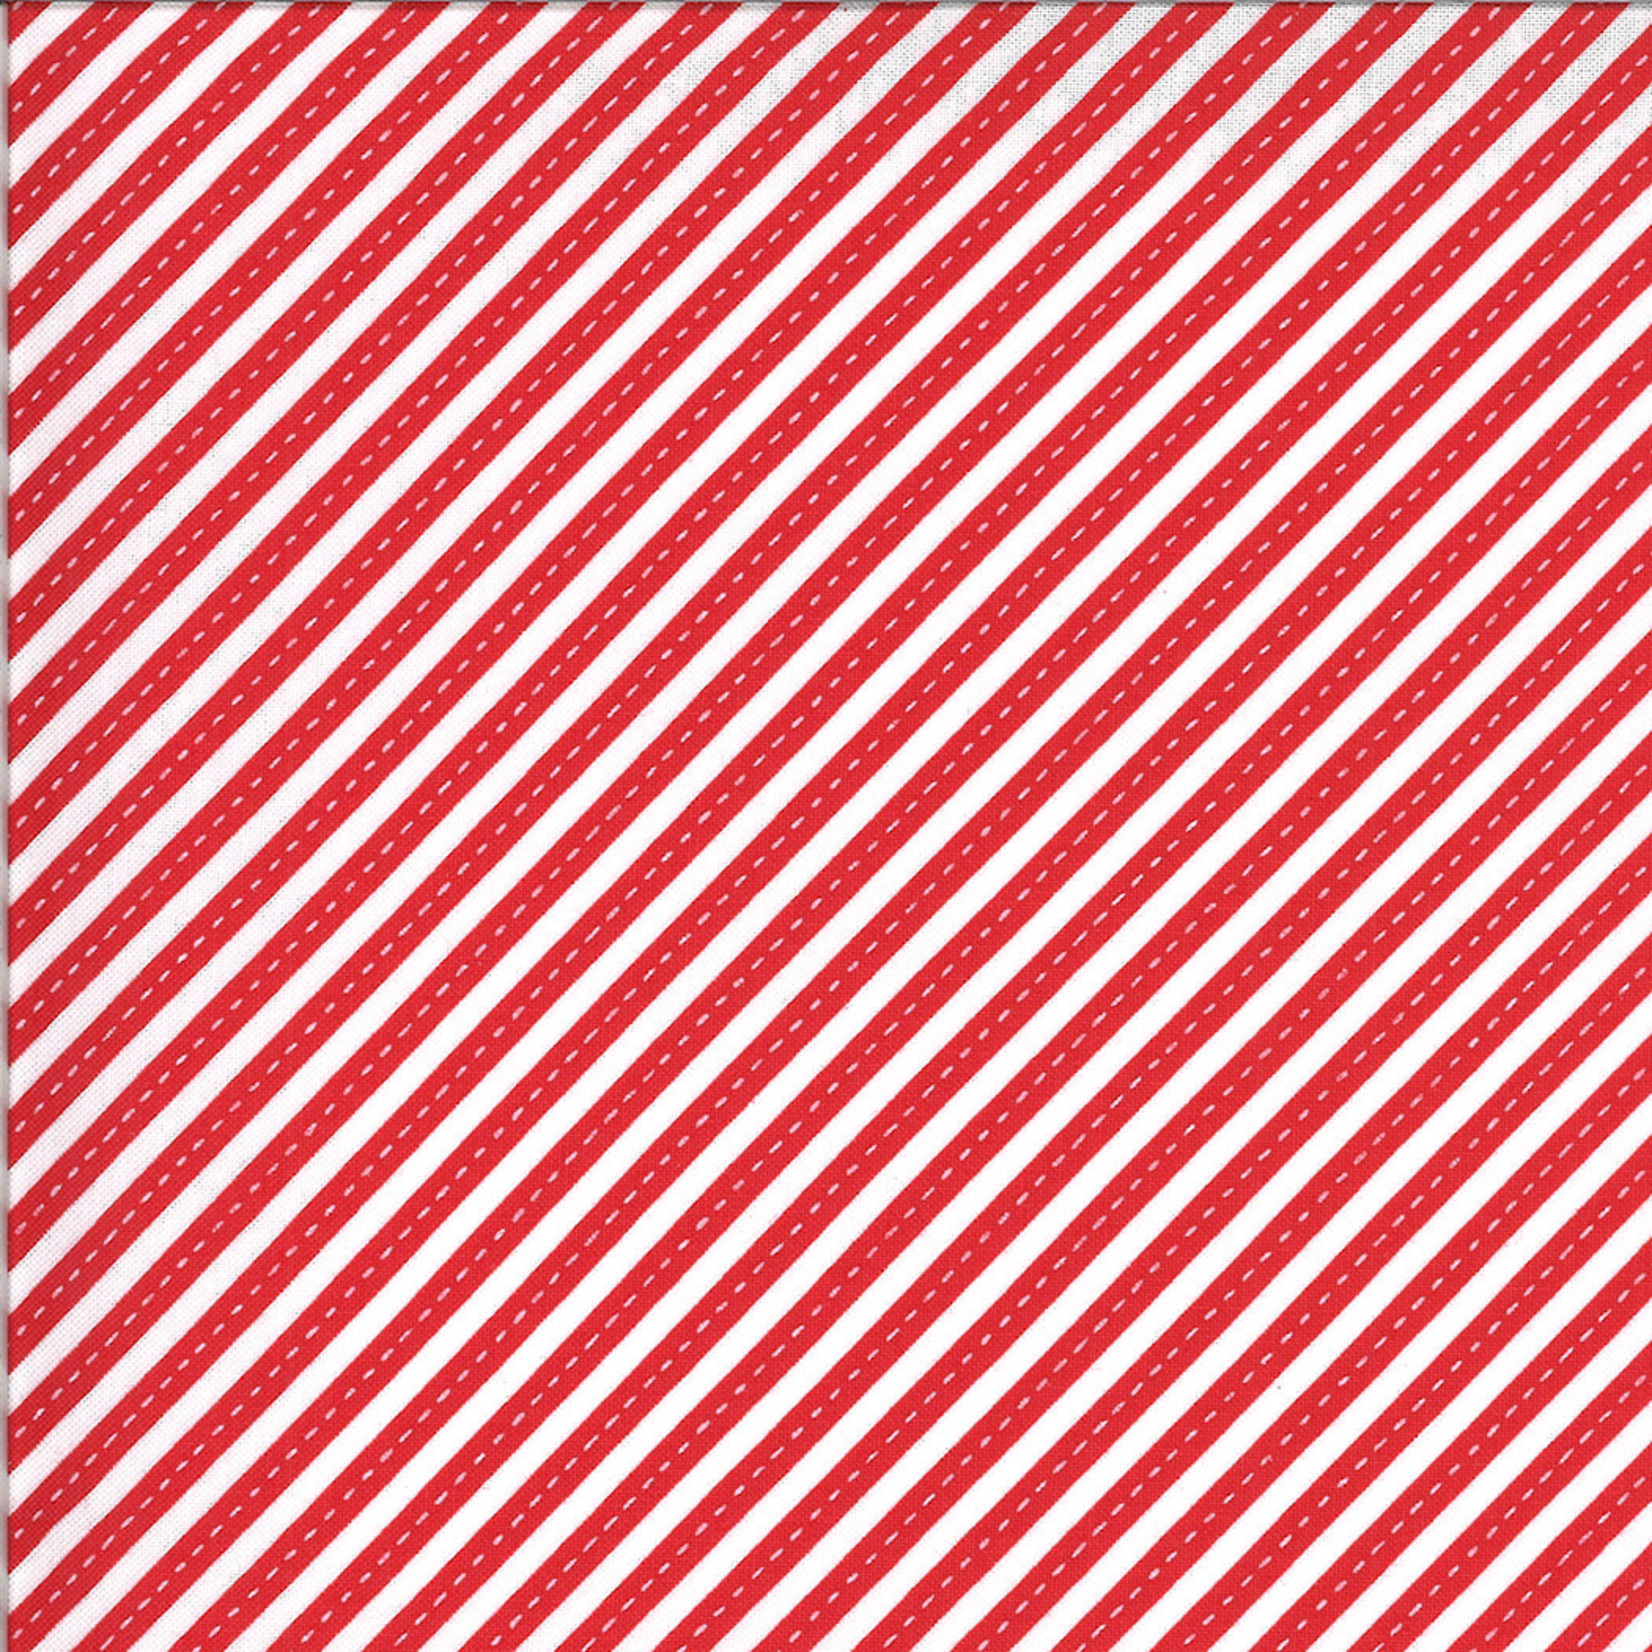 On The Go, Stripes, Red Light (20727 16) $0.20 per cm or $20/m